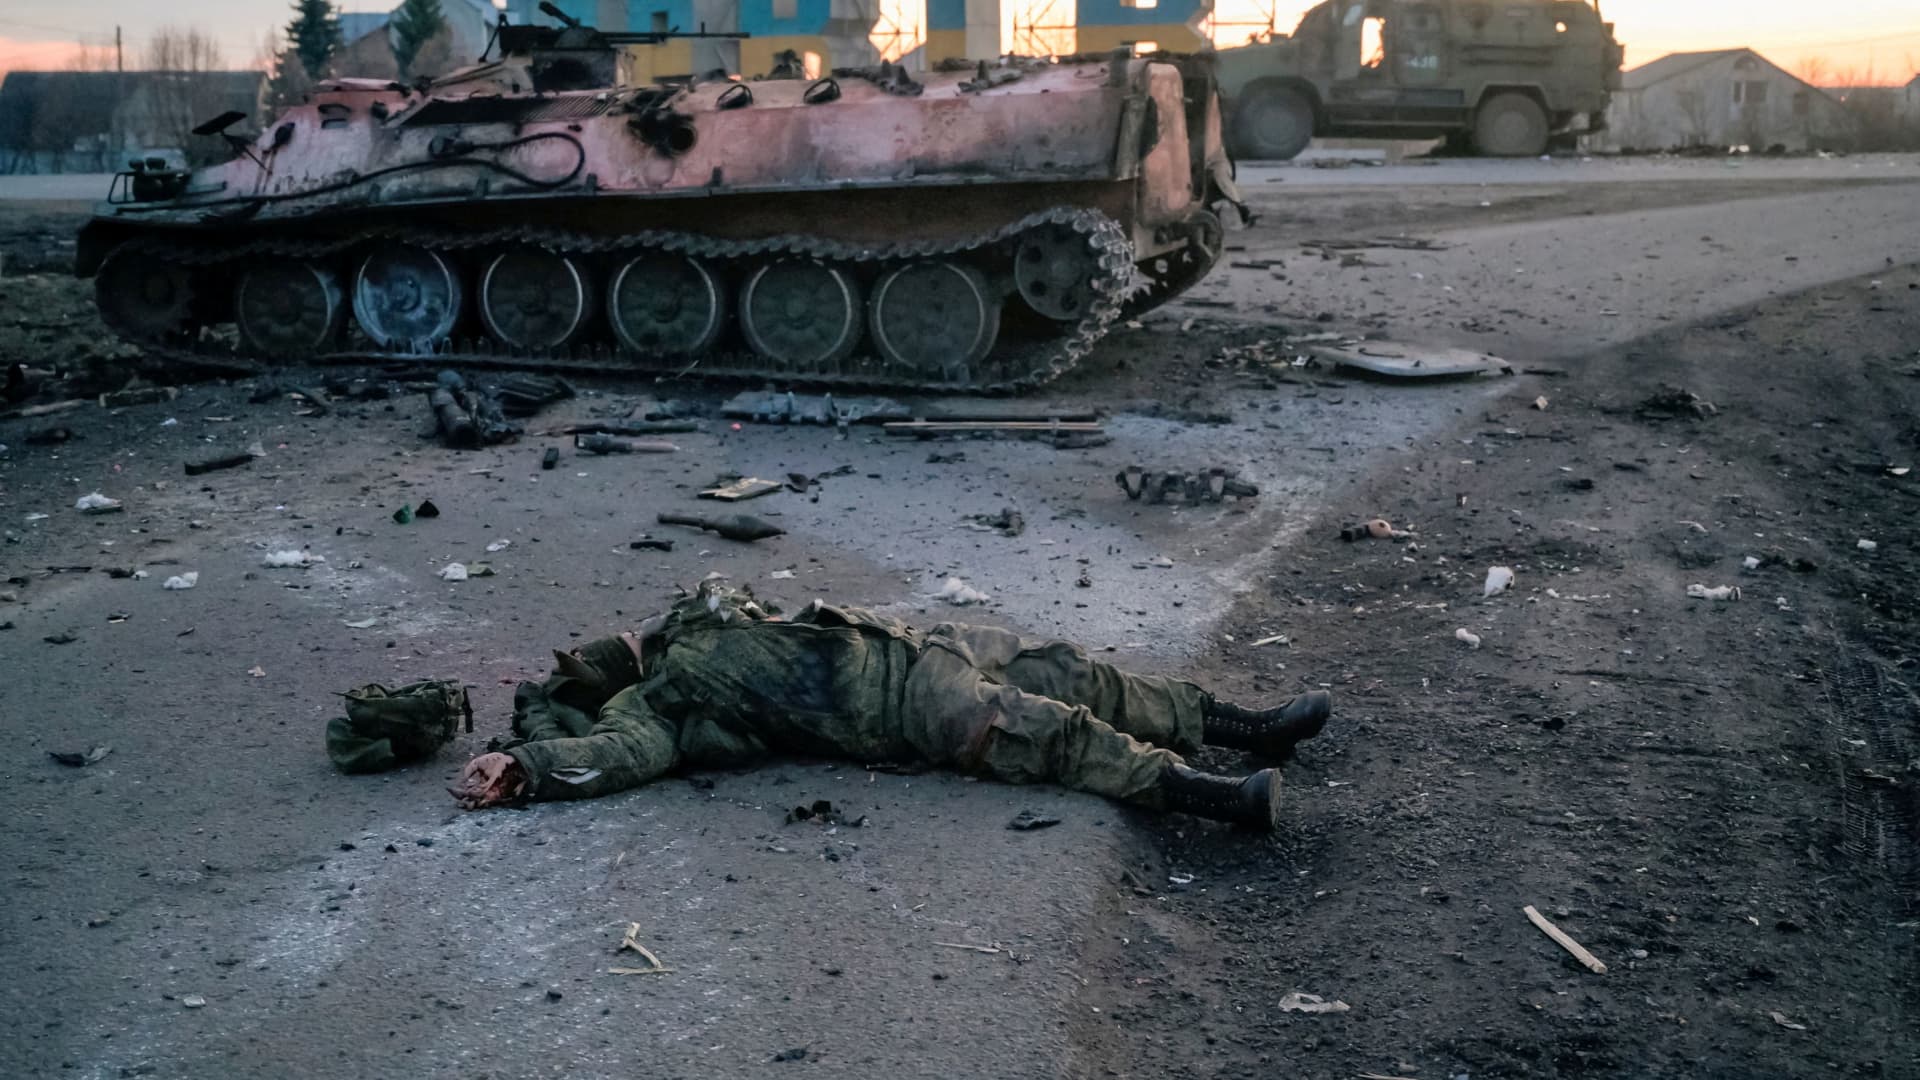 FILE PHOTO: SENSITIVE MATERIAL. THIS IMAGE MAY OFFEND OR DISTURBThe body of a soldier, without insignia, who the Ukrainian military claim is a Russian army serviceman killed in fighting, lies on a road outside the city of Kharkiv, Ukraine February 24, 2022. 